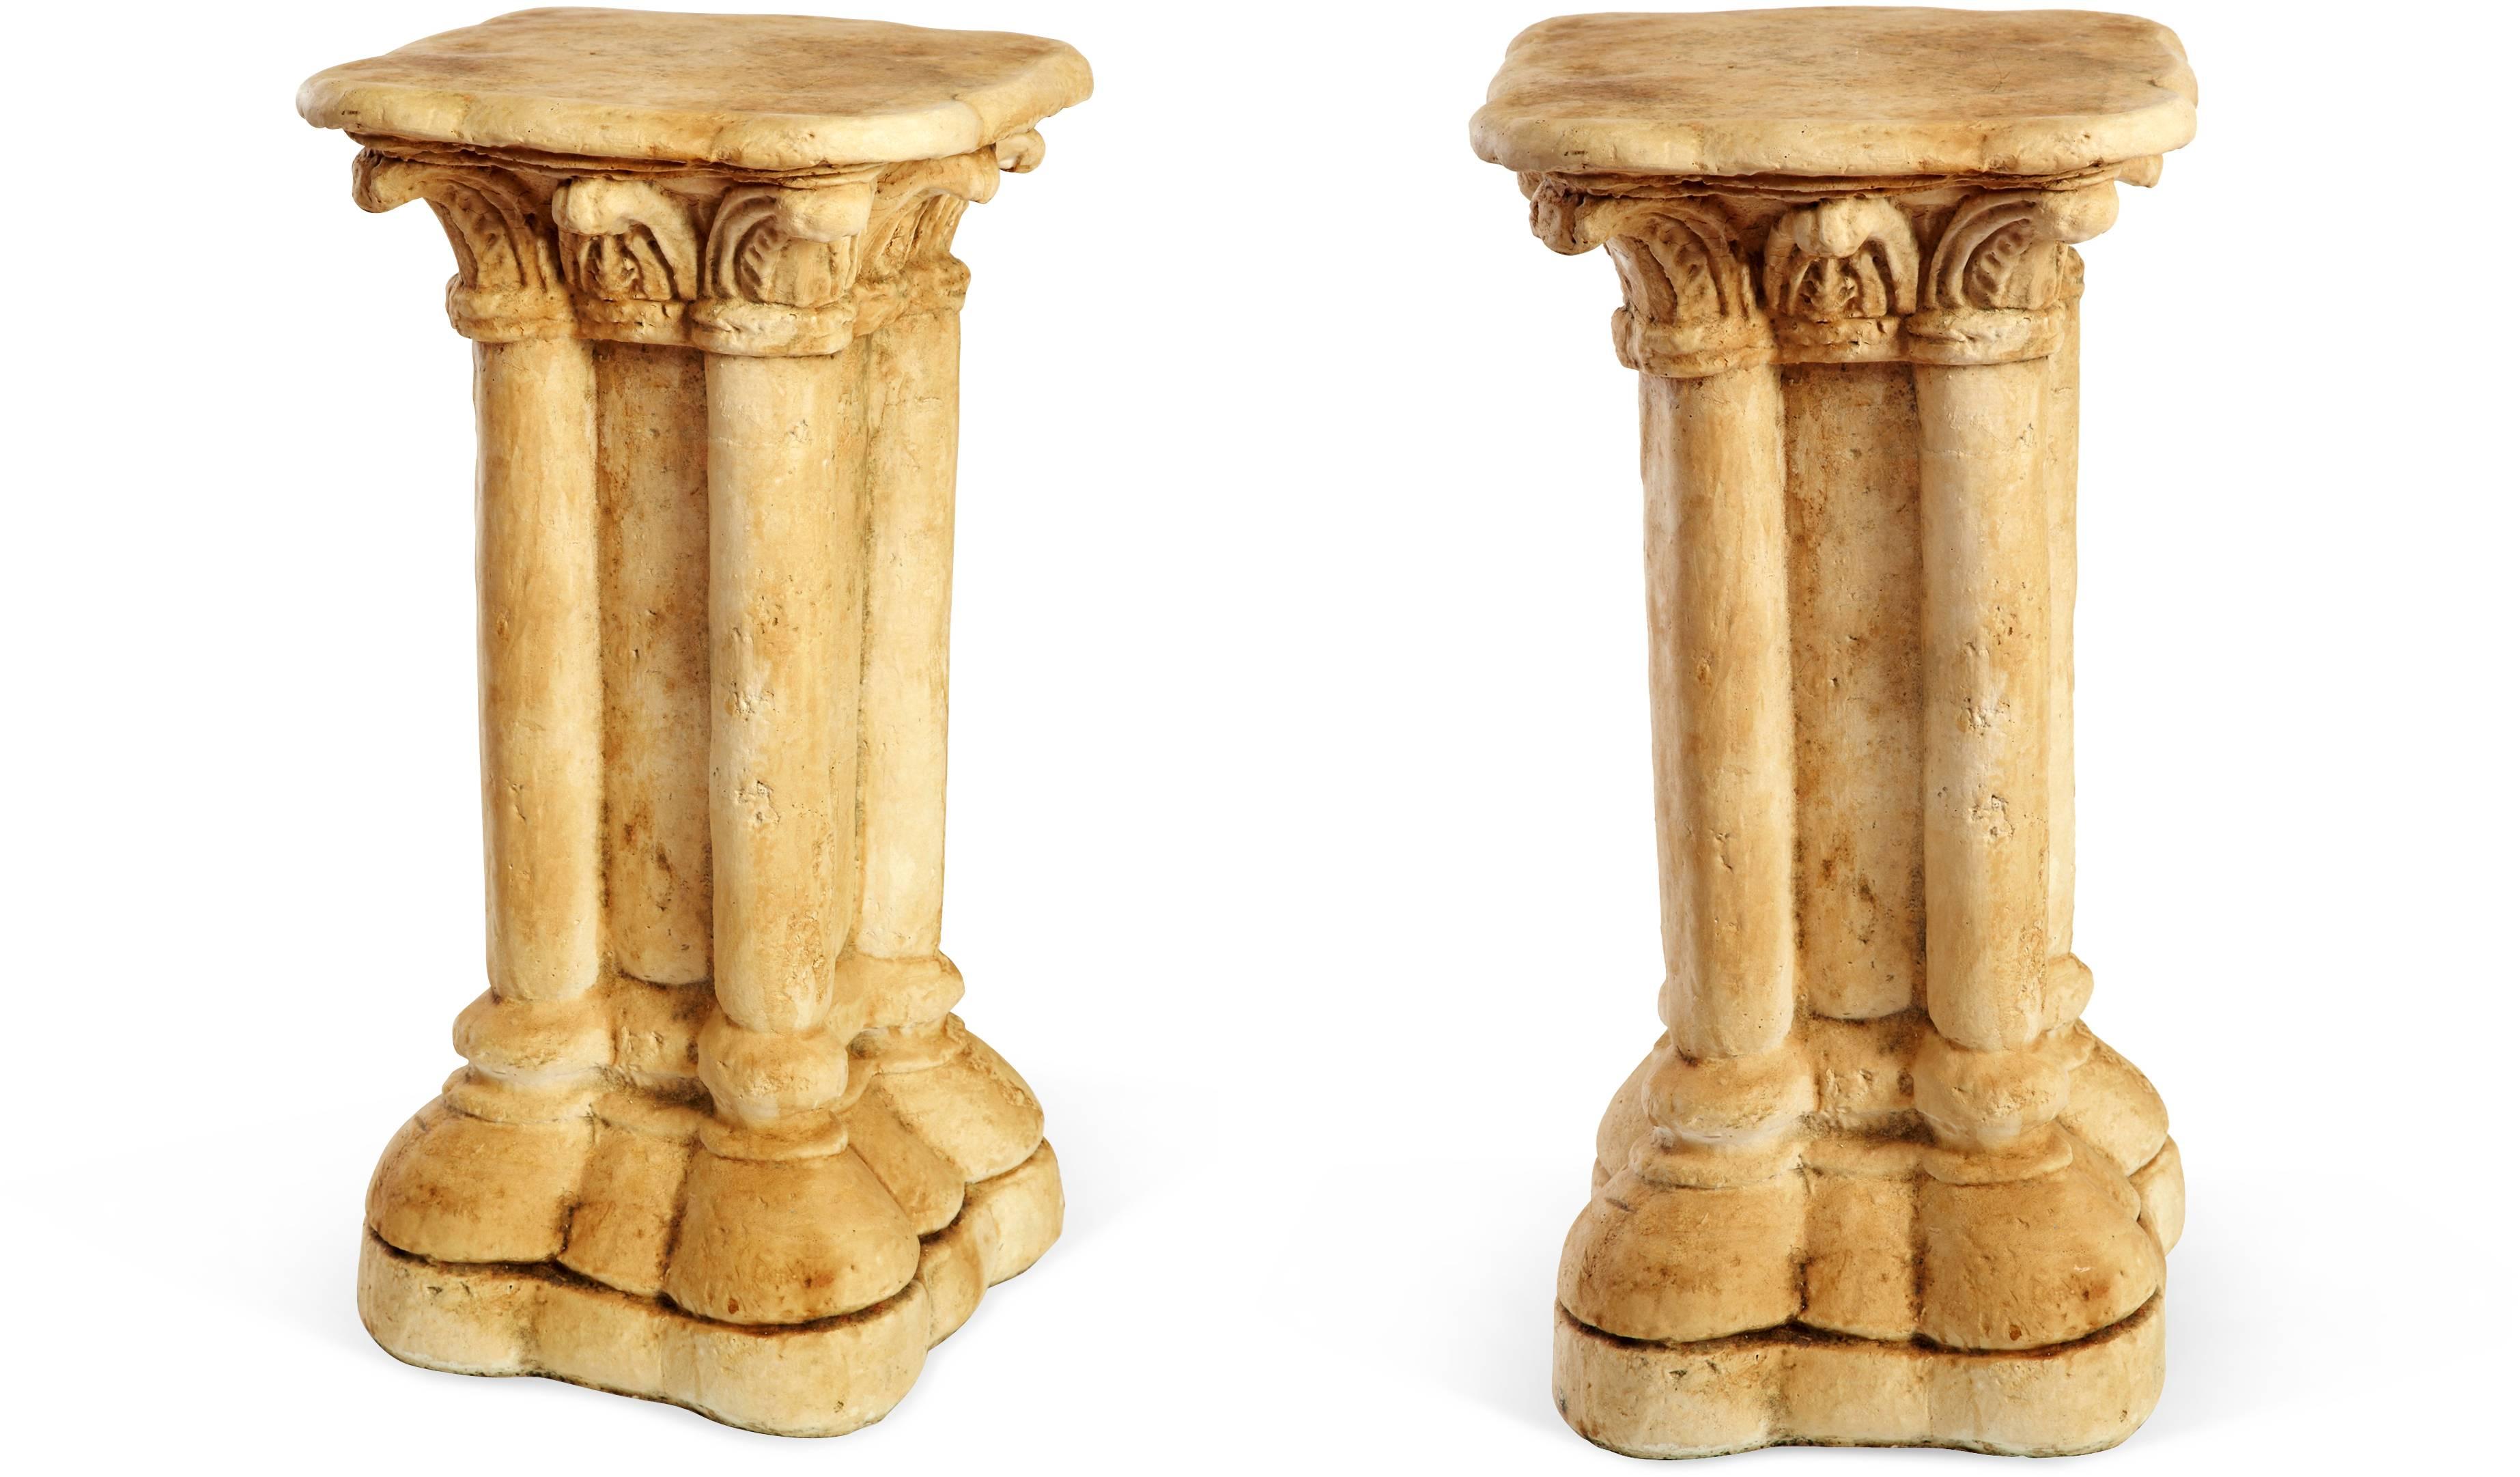 Pair of Italian Renaissance style cast concrete pedestals. Add a top of your choice for a perfect console table, sofa table, sideboard or buffet table.
Search term: neoclassical.